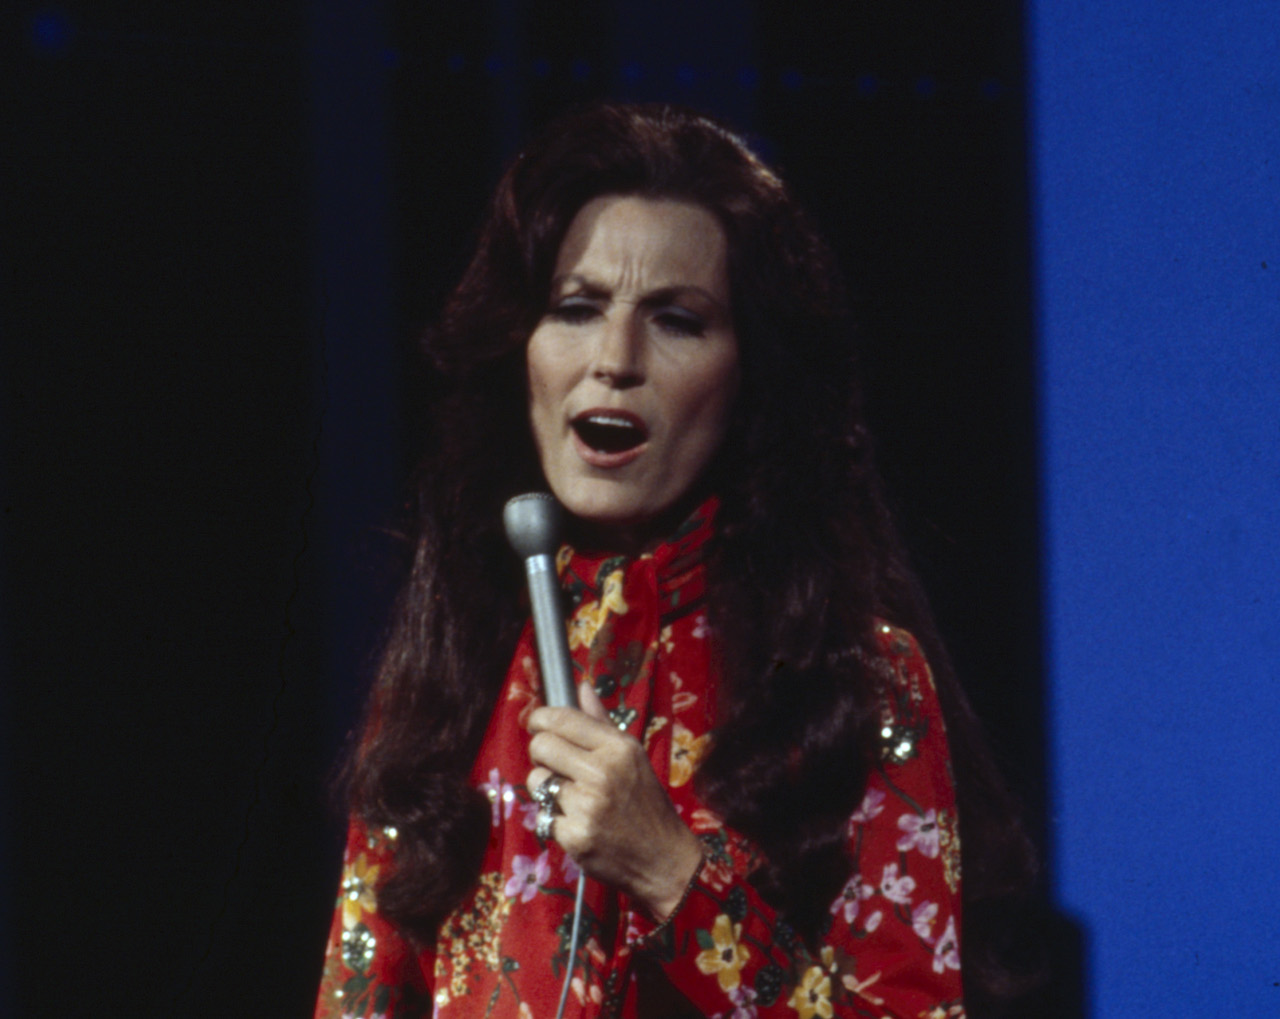 Loretta Lynn singing into a microphone, wearing a red floral dress